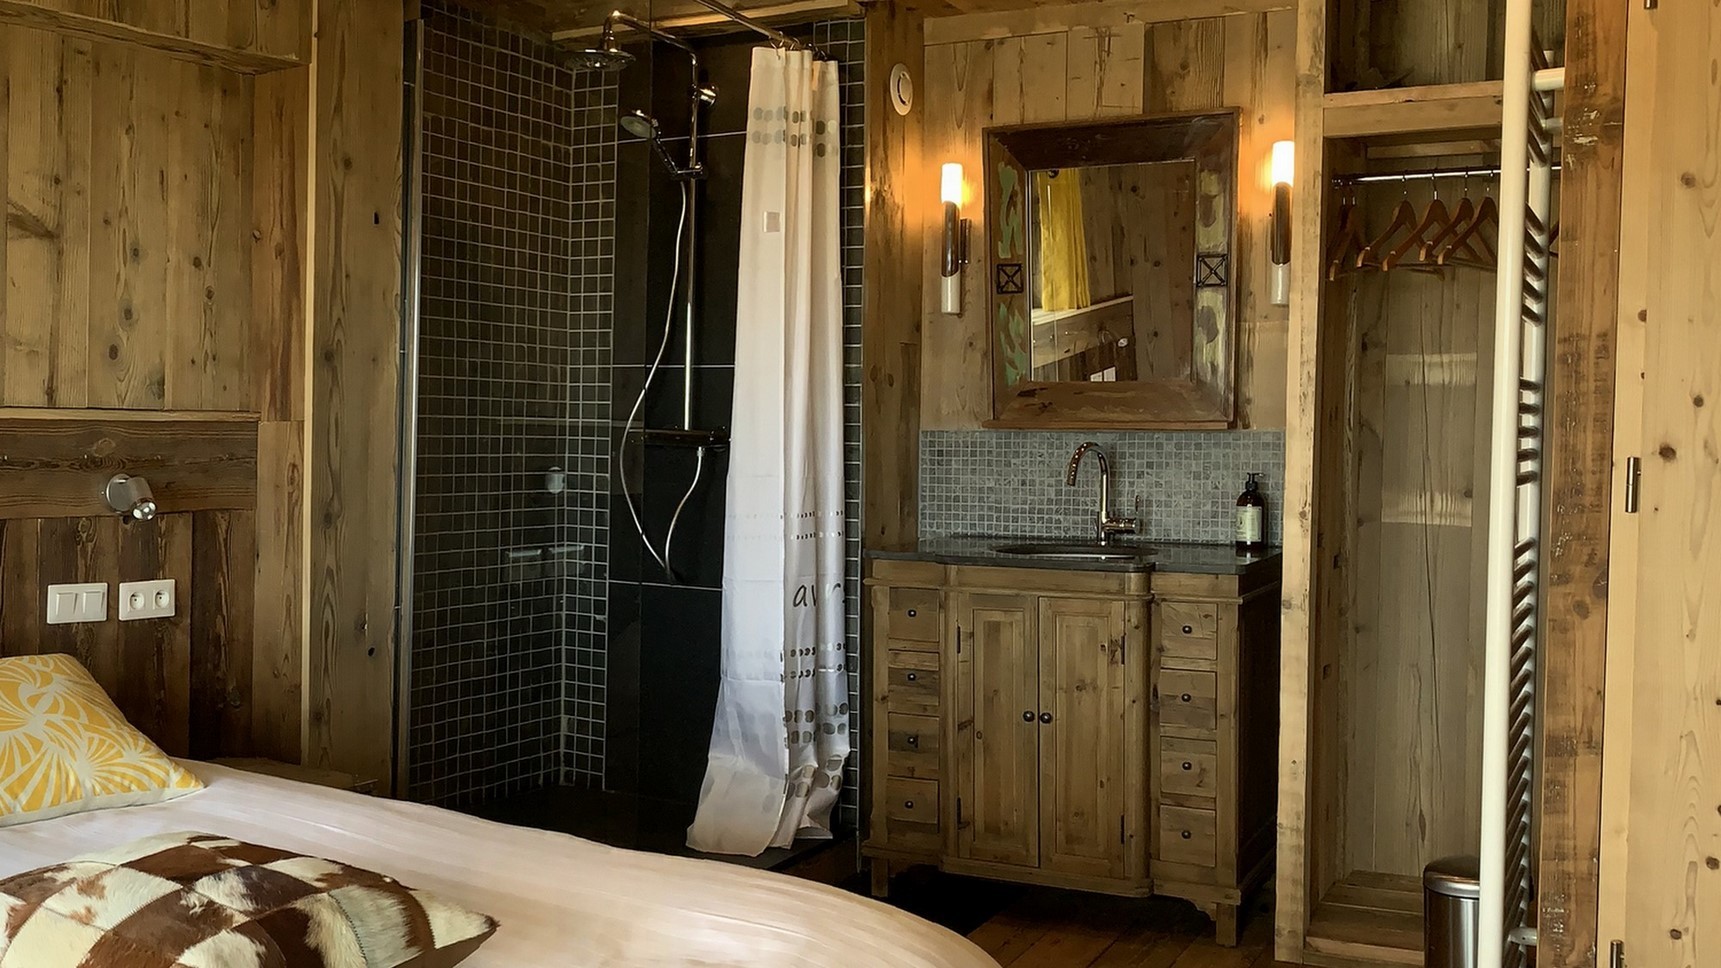 La Cascade room, Master suite king size bed for 1 or 2 people, 90x90 shower, old wood furniture